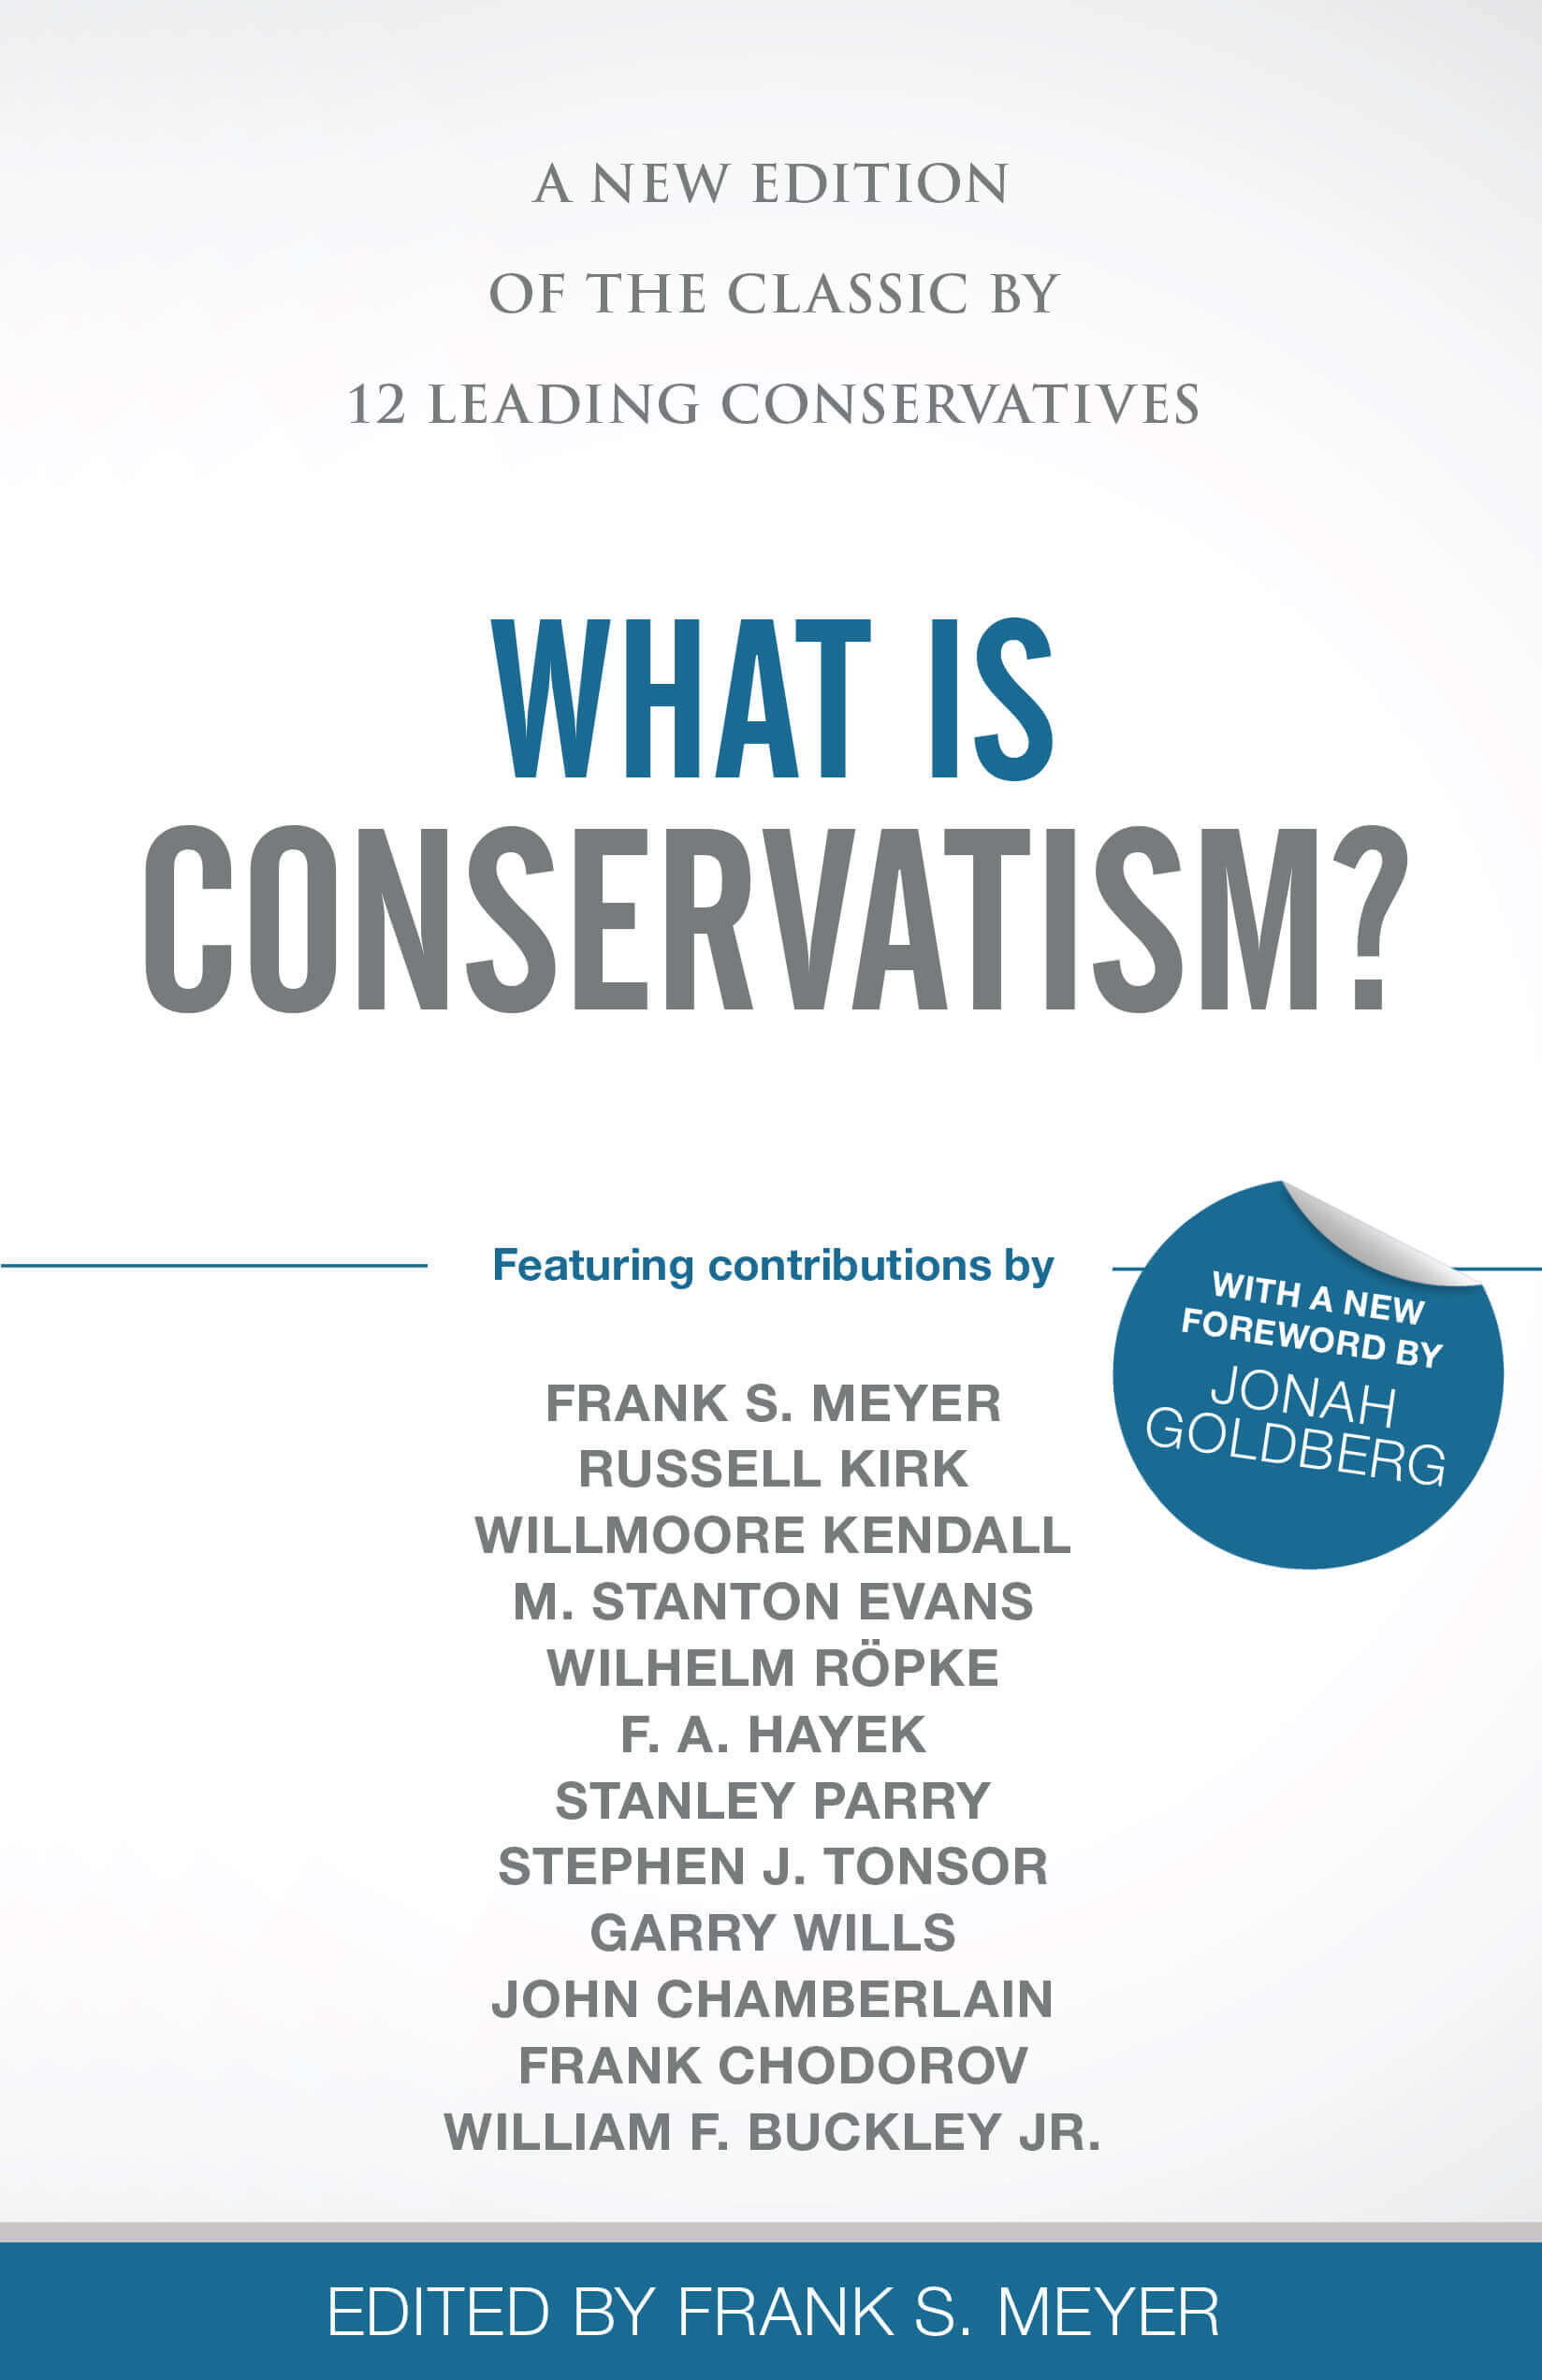 Buy What Is Conservatism? for 30% off